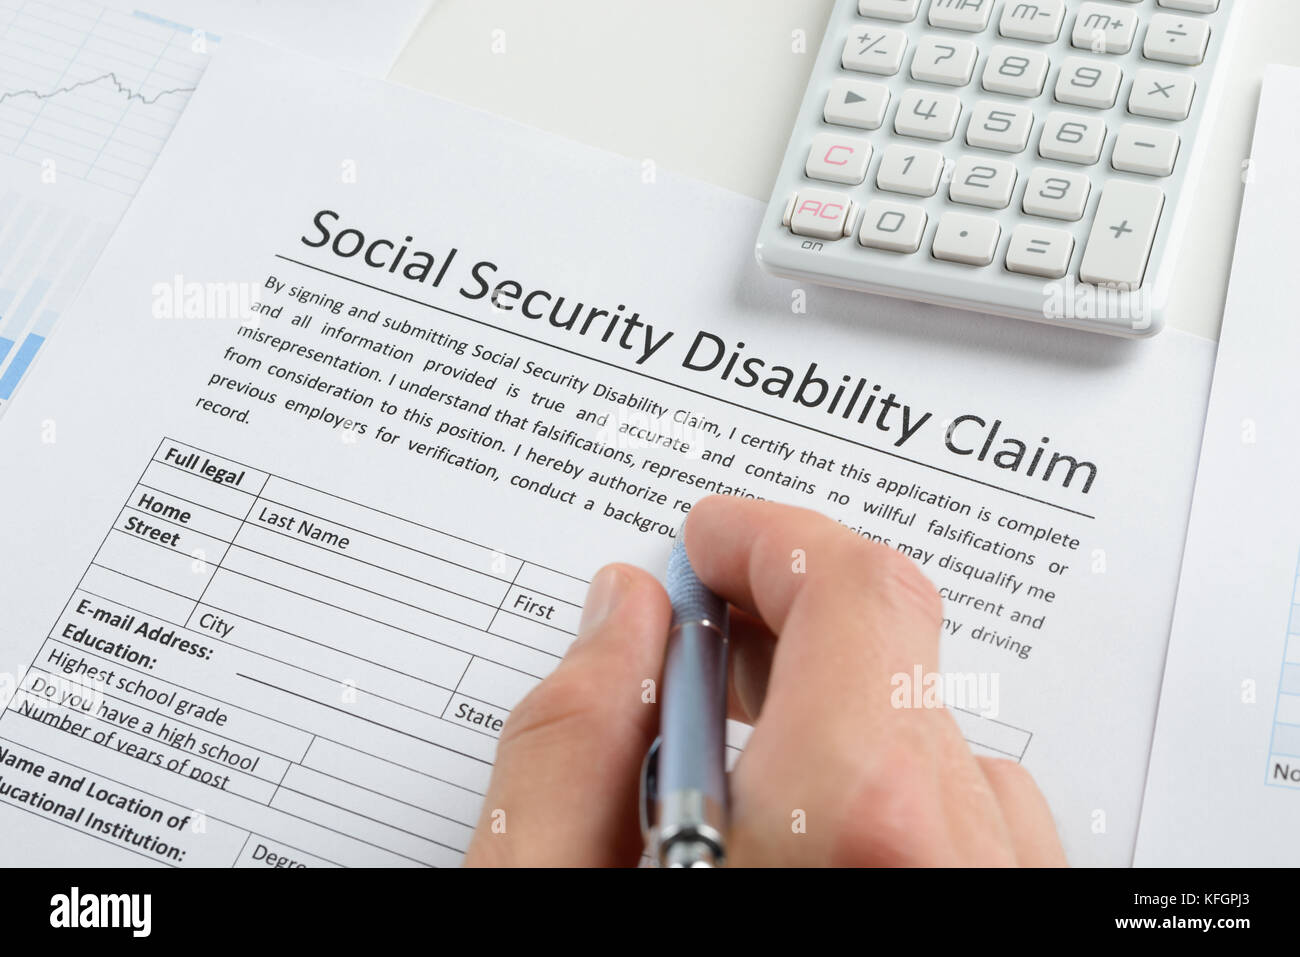 Close-up Of Person Hand With Pen And Calculator Filling Social Security Disability Claim Form Stock Photo